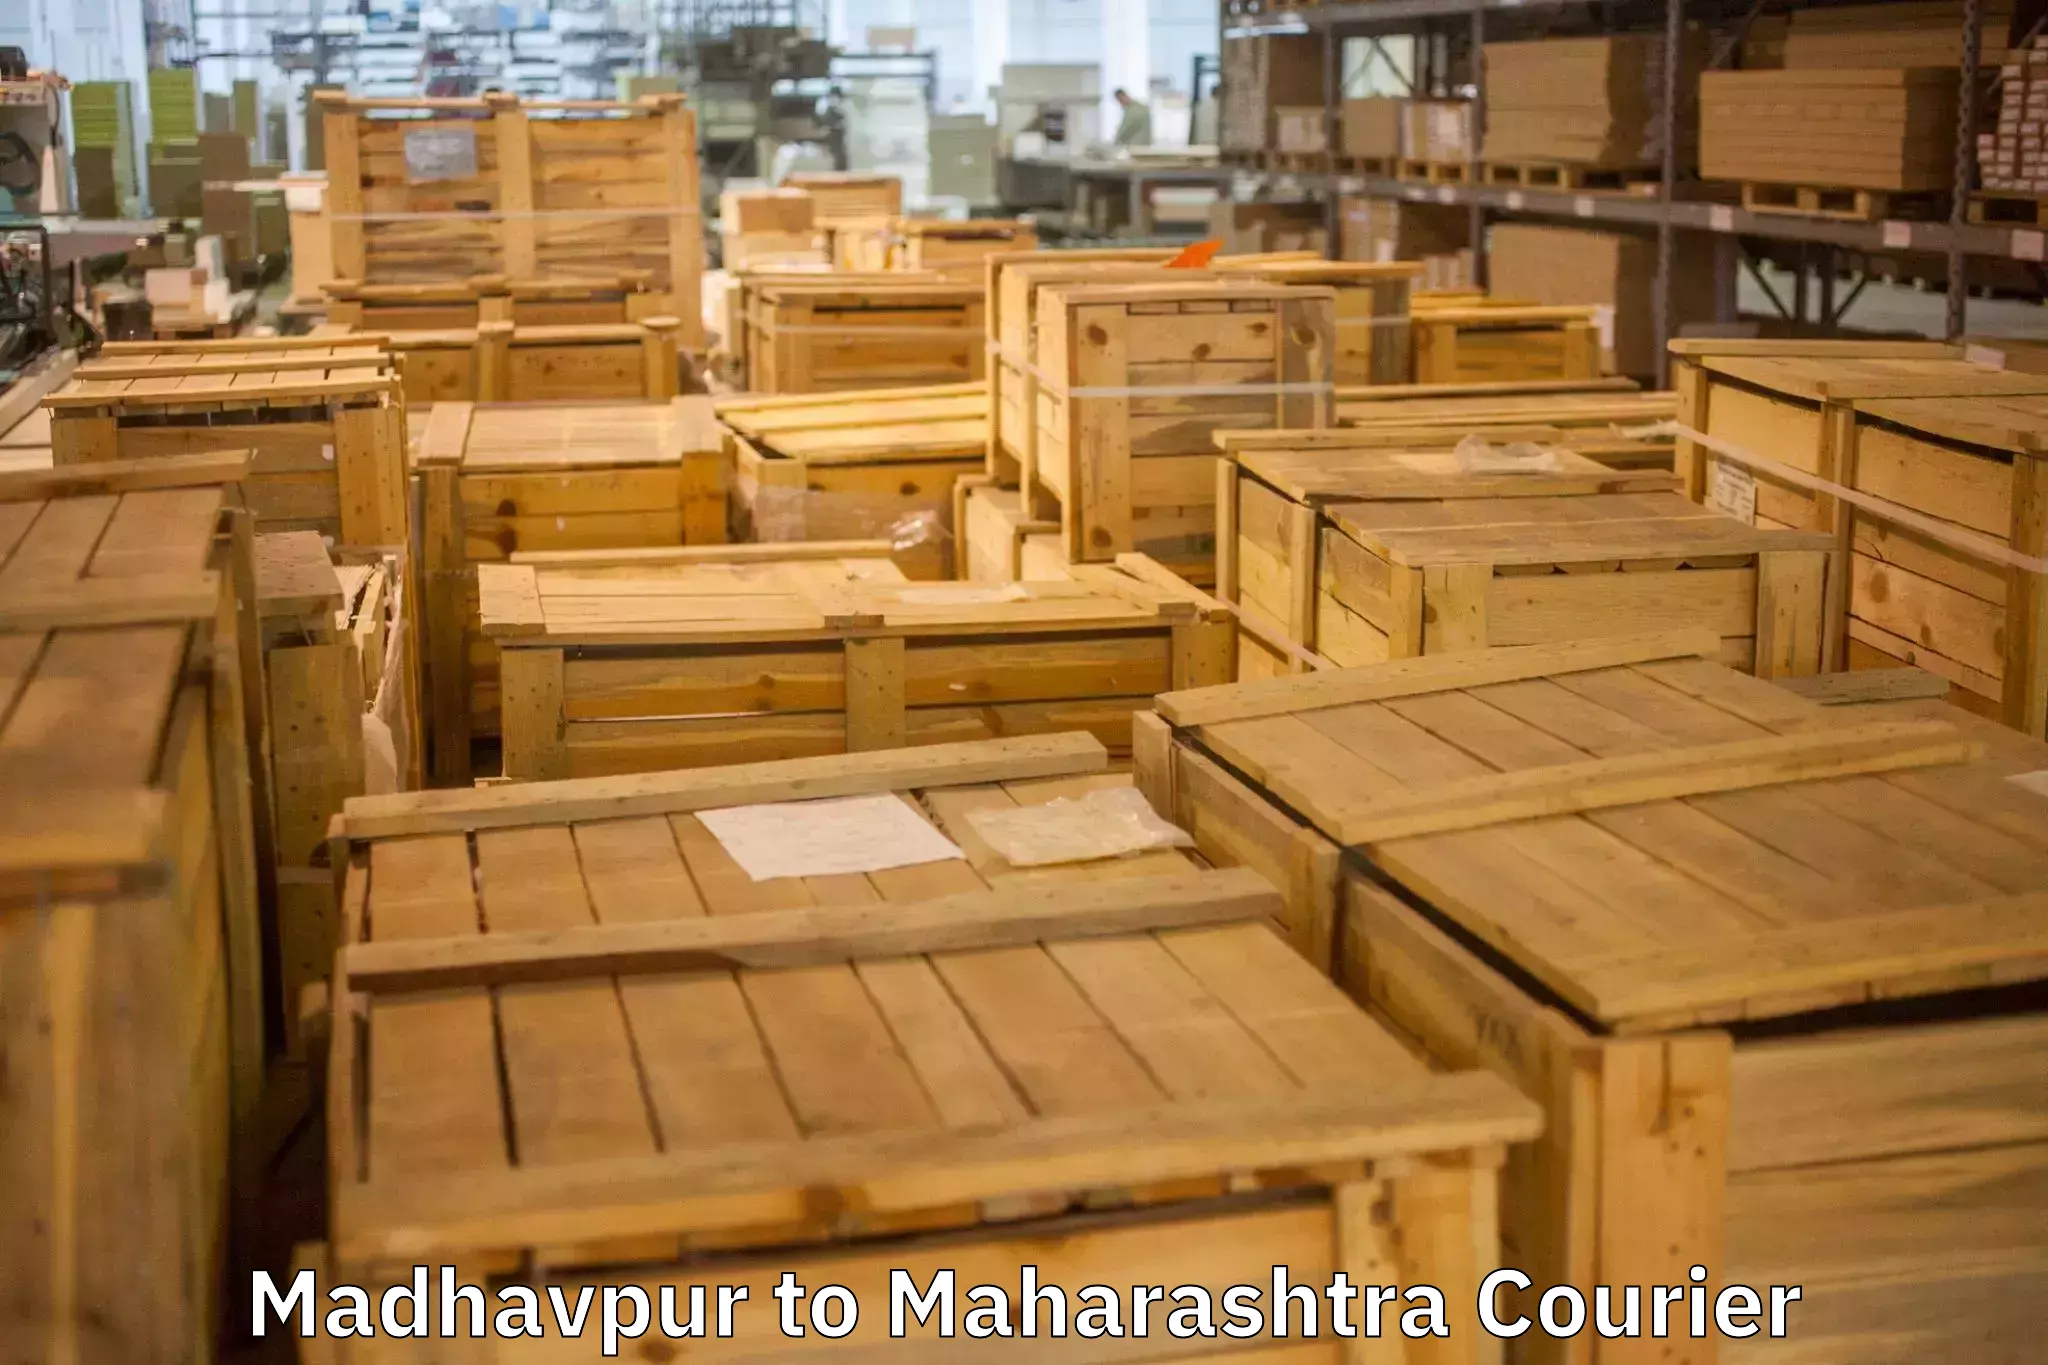 Moving and storage services in Madhavpur to Nilanga